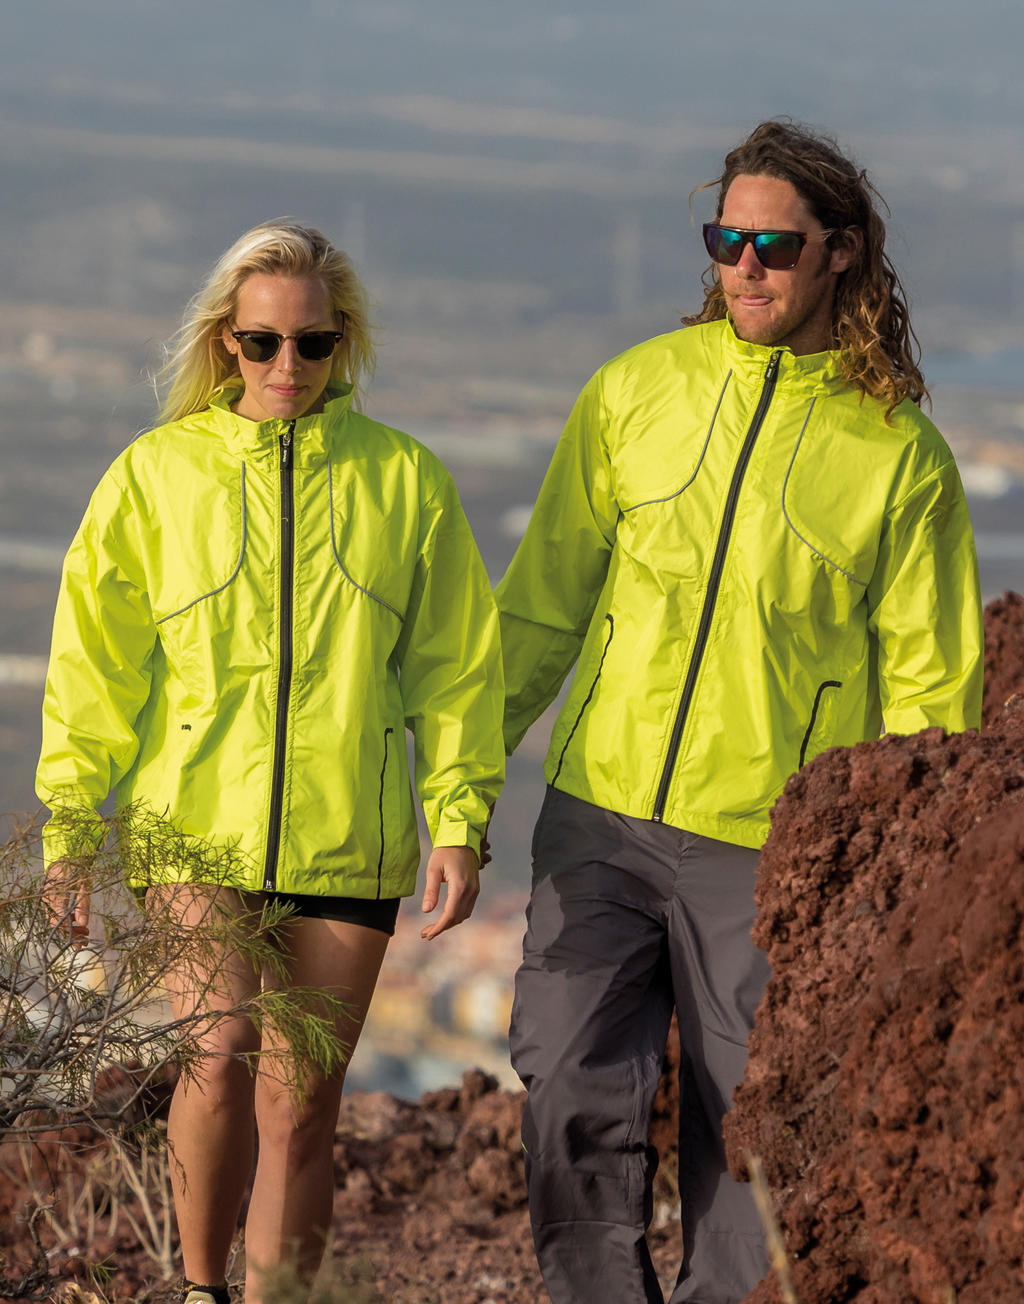  Spiro Cycling Jacket in Farbe Neon Lime